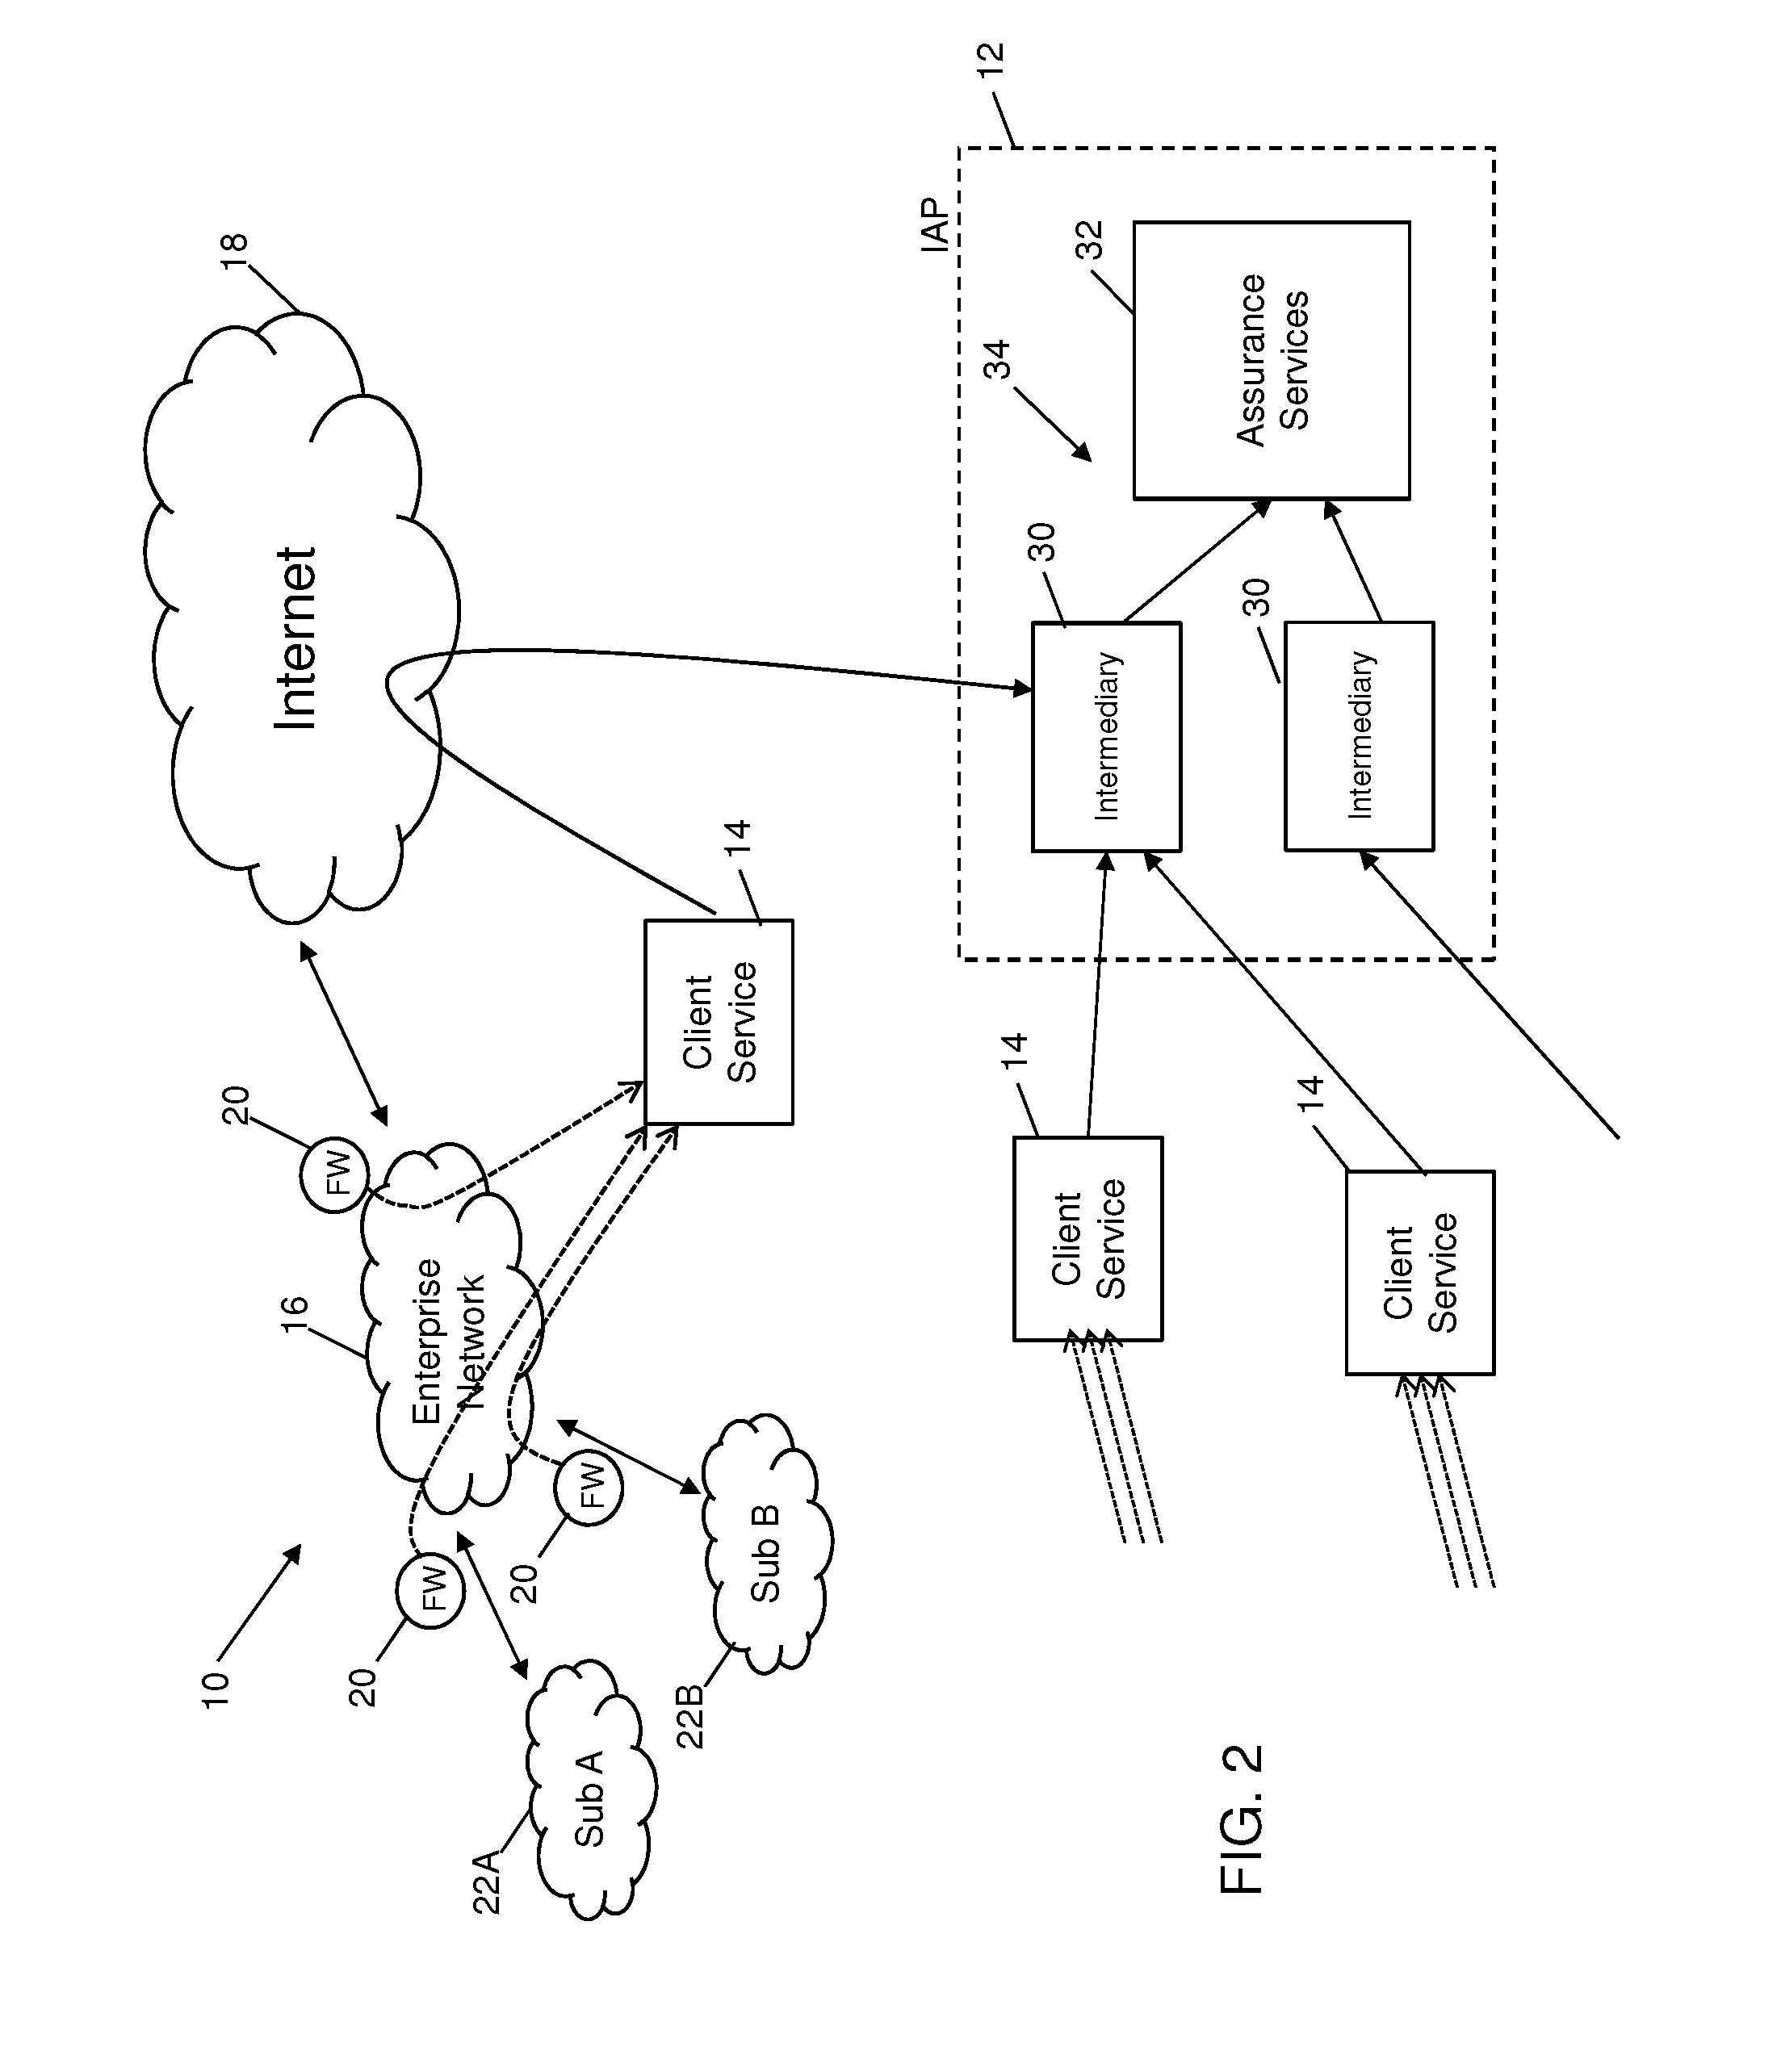 System and method for monitoring data in a client environment